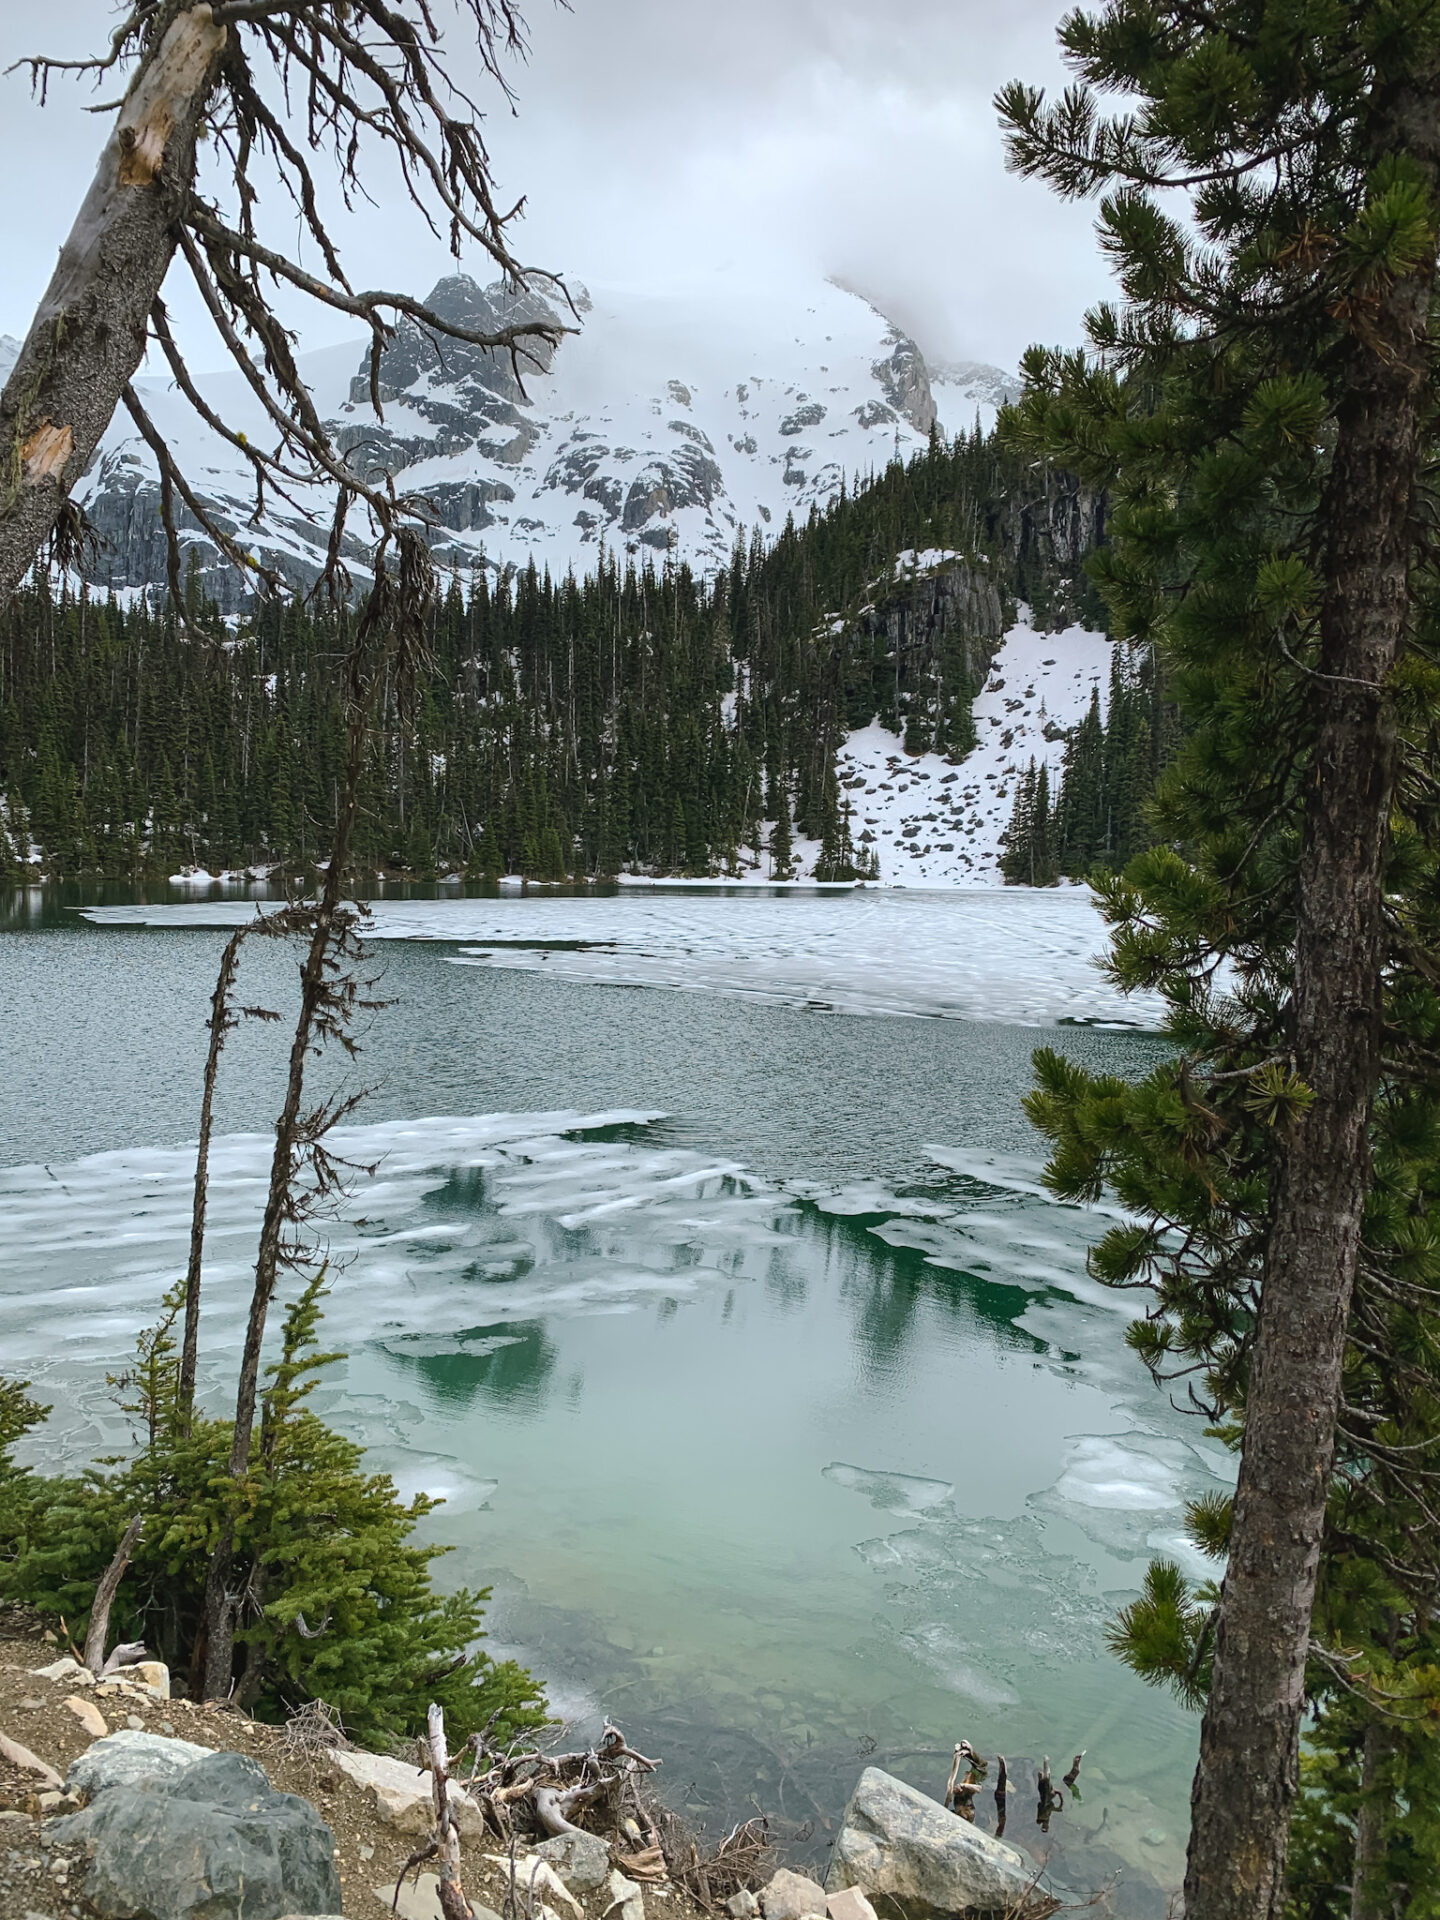 Hiking at Joffre Lakes Provincial Park in Mount Currie, British Columbia